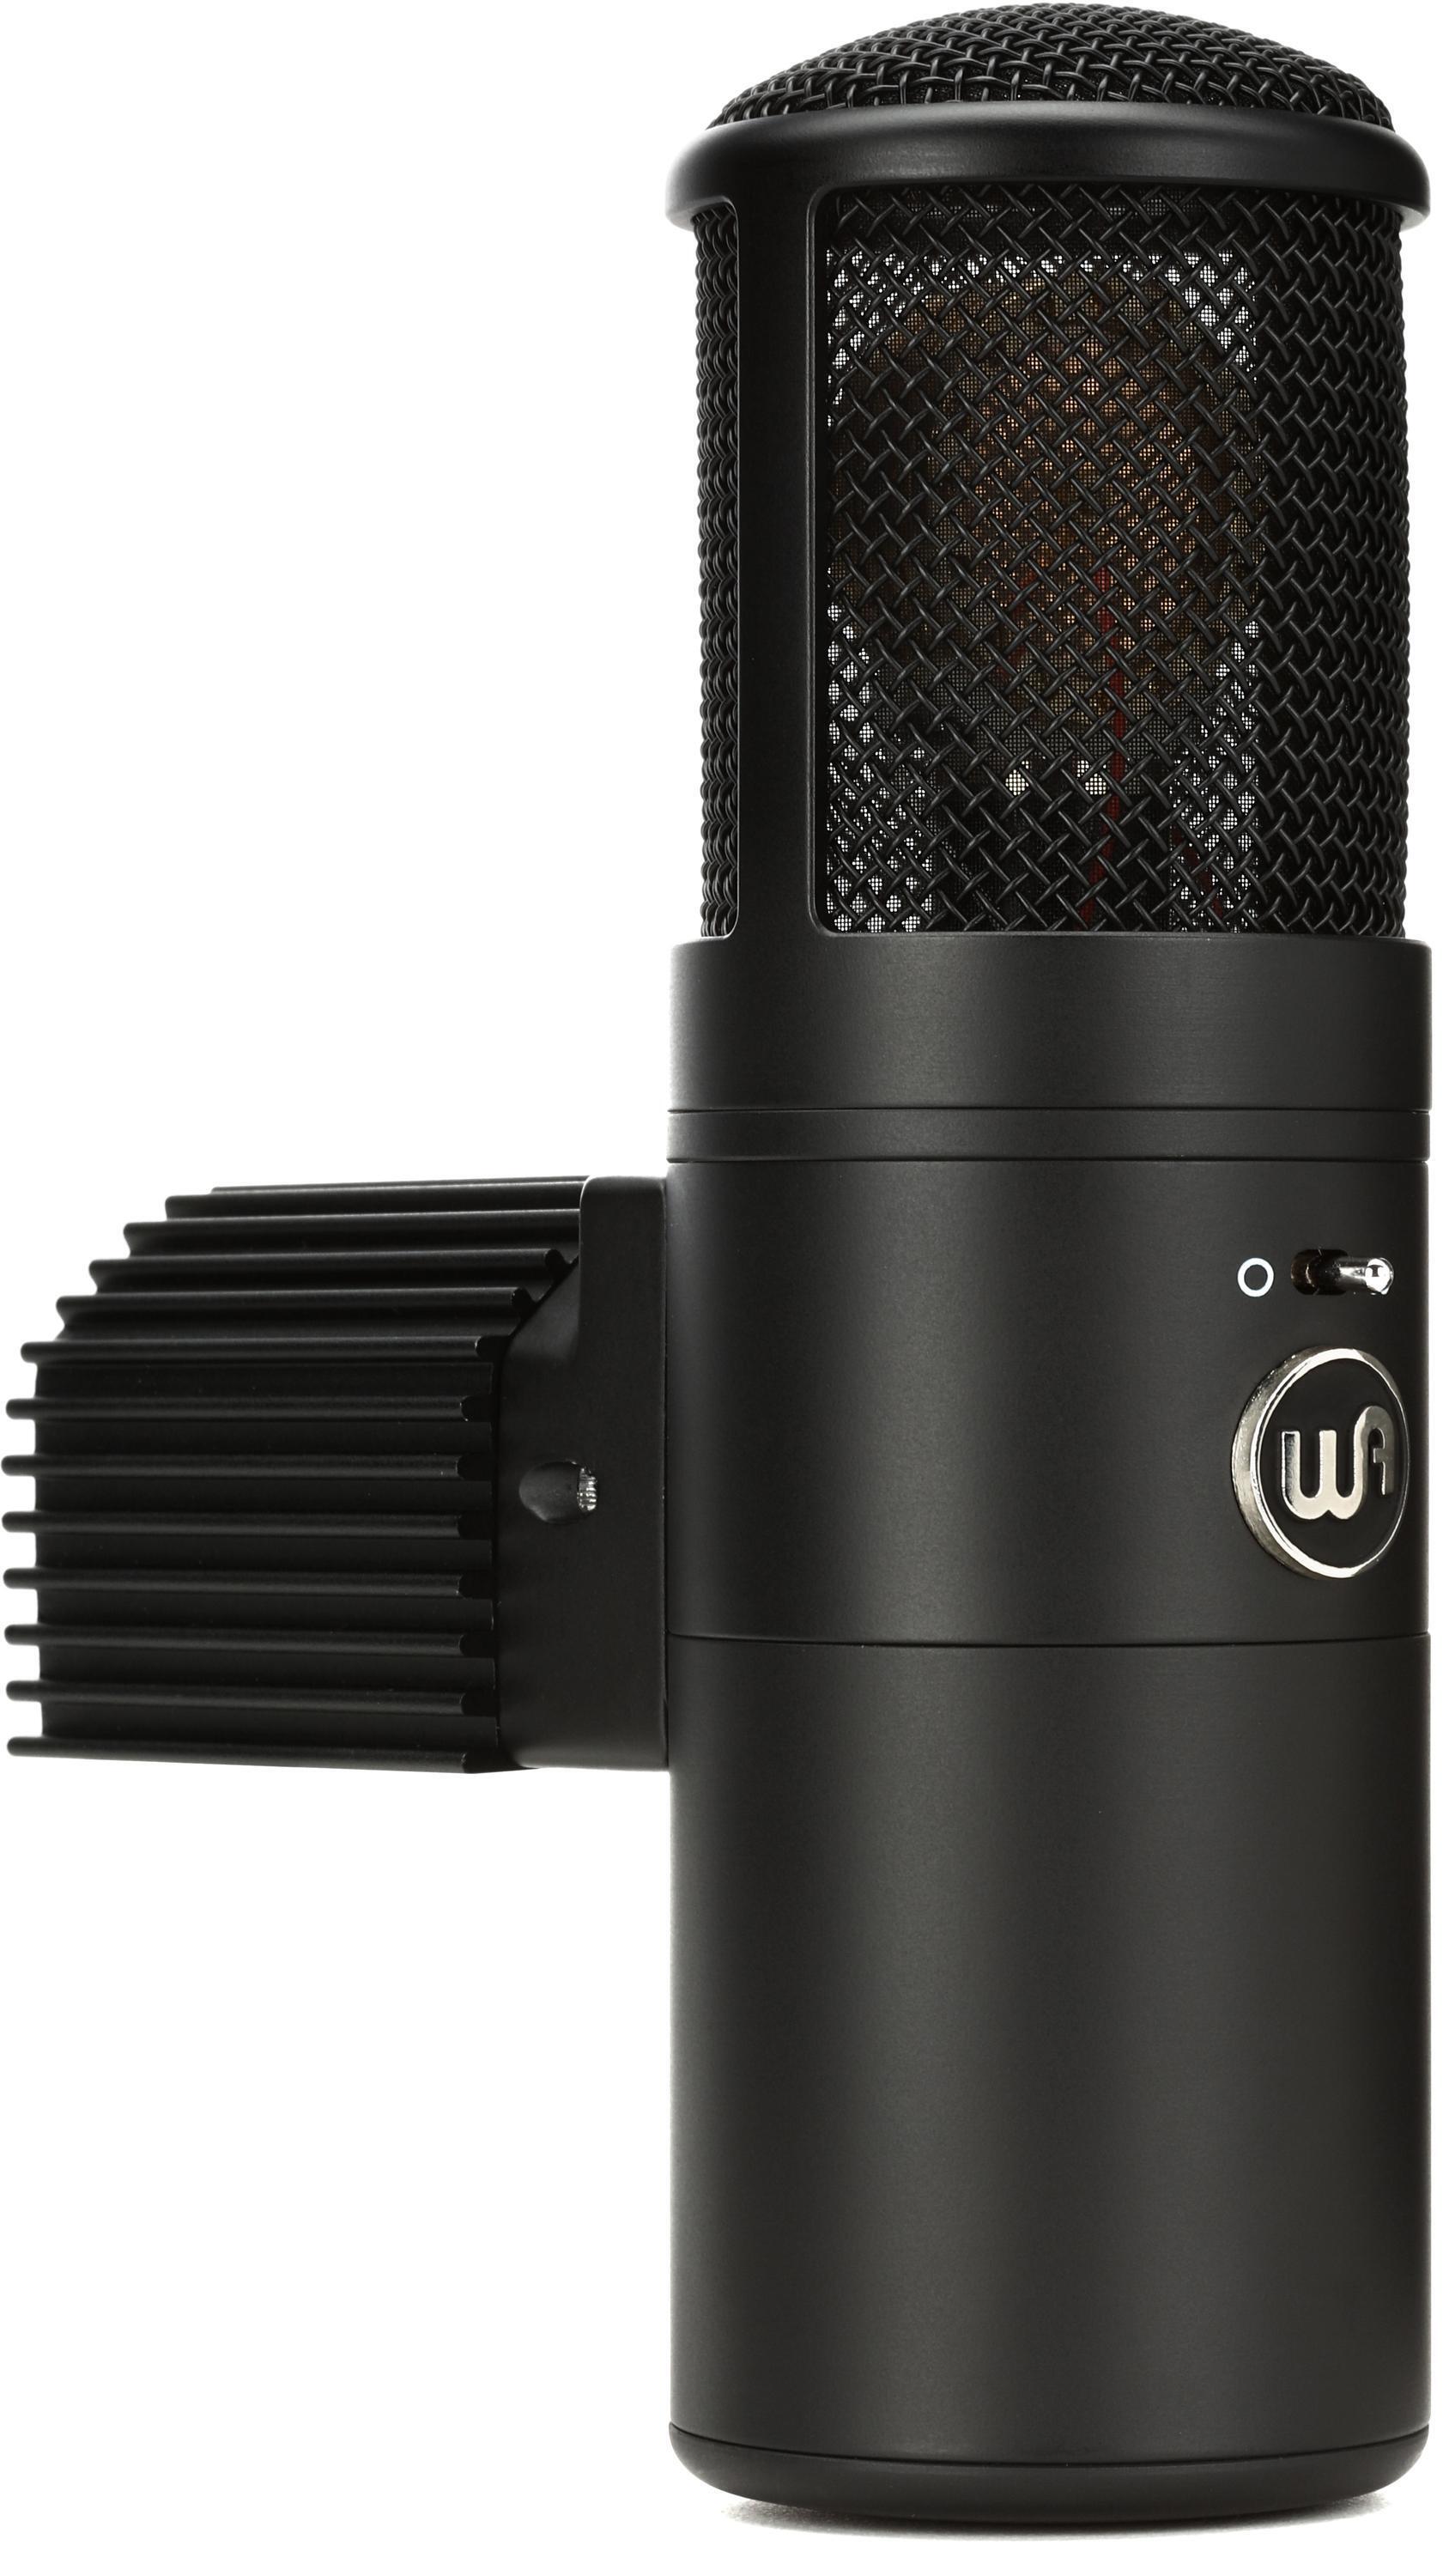 Hot Selling With Low Price Autotune Microphone - Buy Hot Selling With Low  Price Autotune Microphone Product on